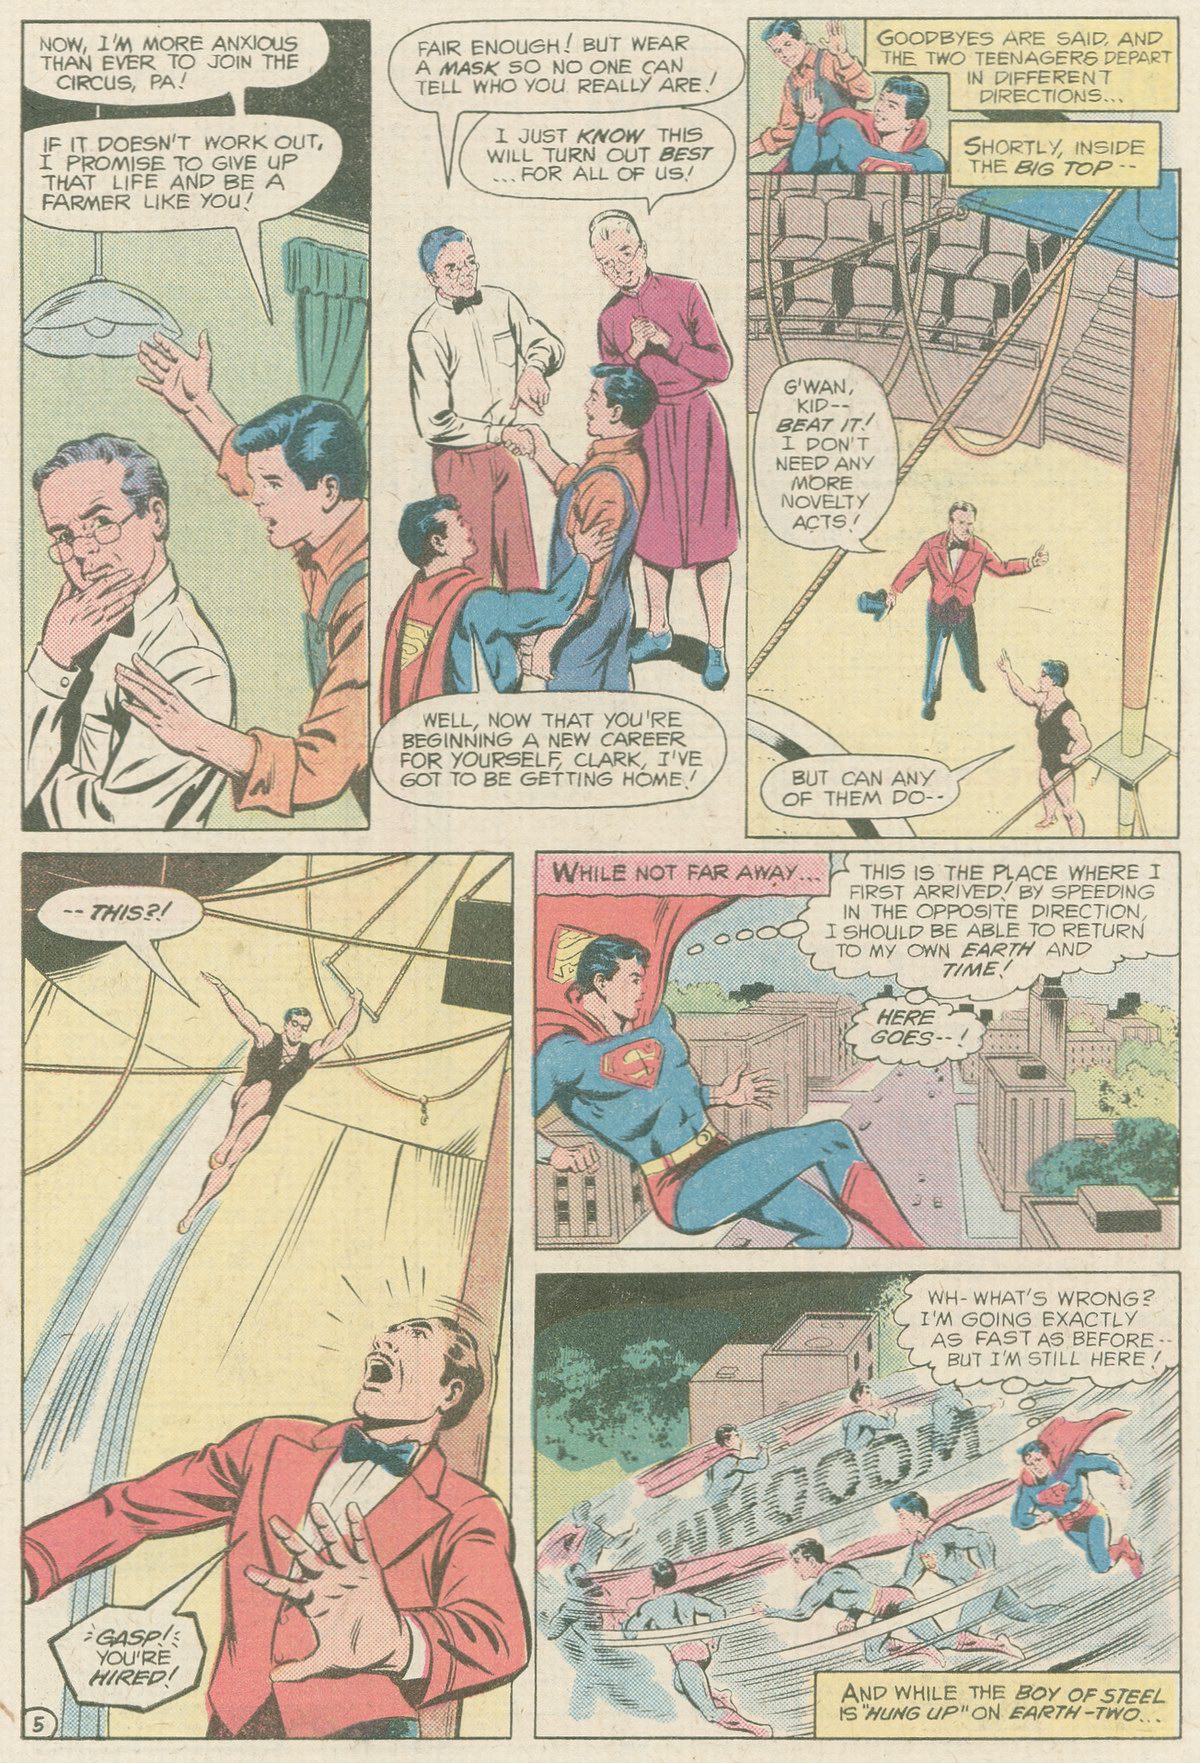 The New Adventures of Superboy 16 Page 22